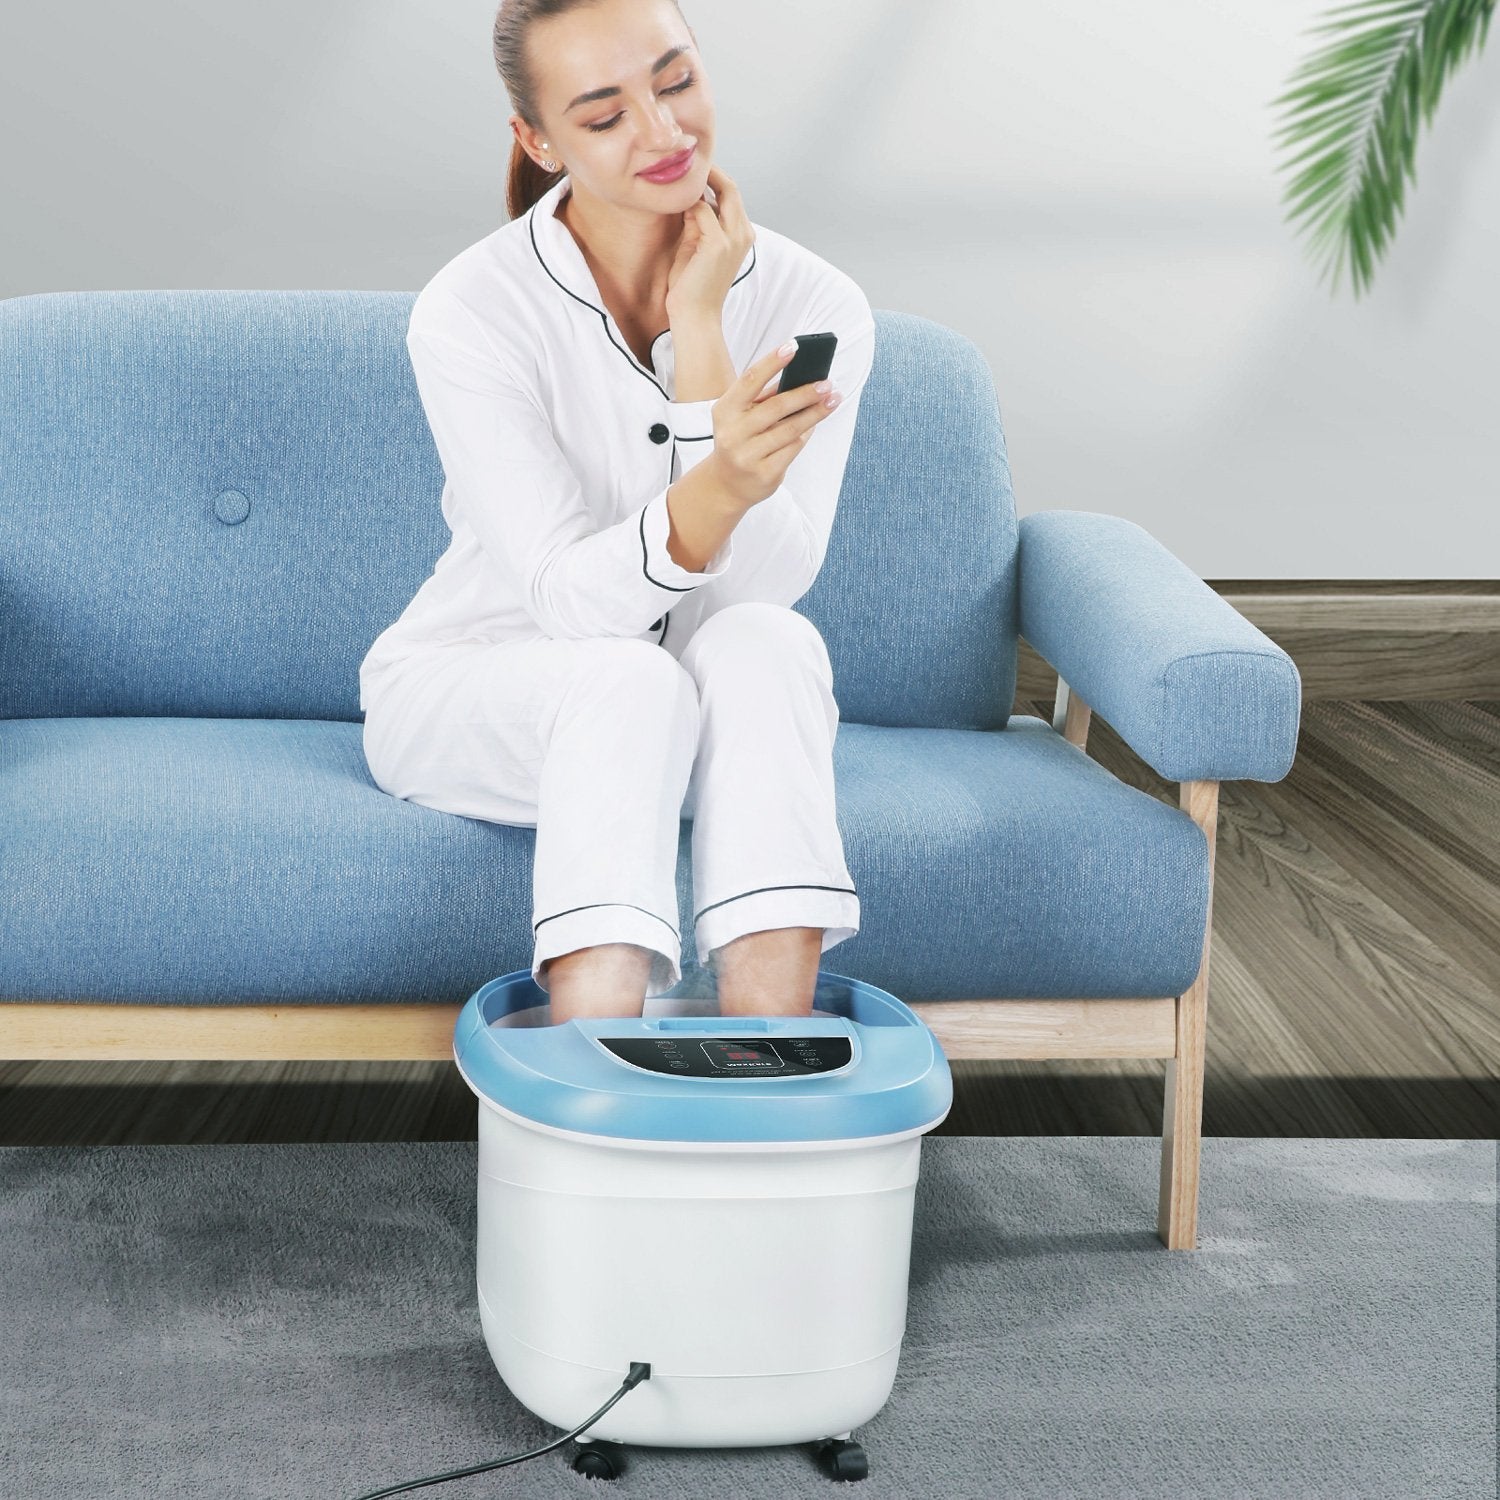 Load image into Gallery viewer, Foot Bath Spa Massager with Wireless Remote Control and 8 Electric Shiatsu Massaging Rollers, Heated Foot Bath Tub with Heat Bubbles Vibration to Relieve Feet Muscle for Home Office - NAIPO
